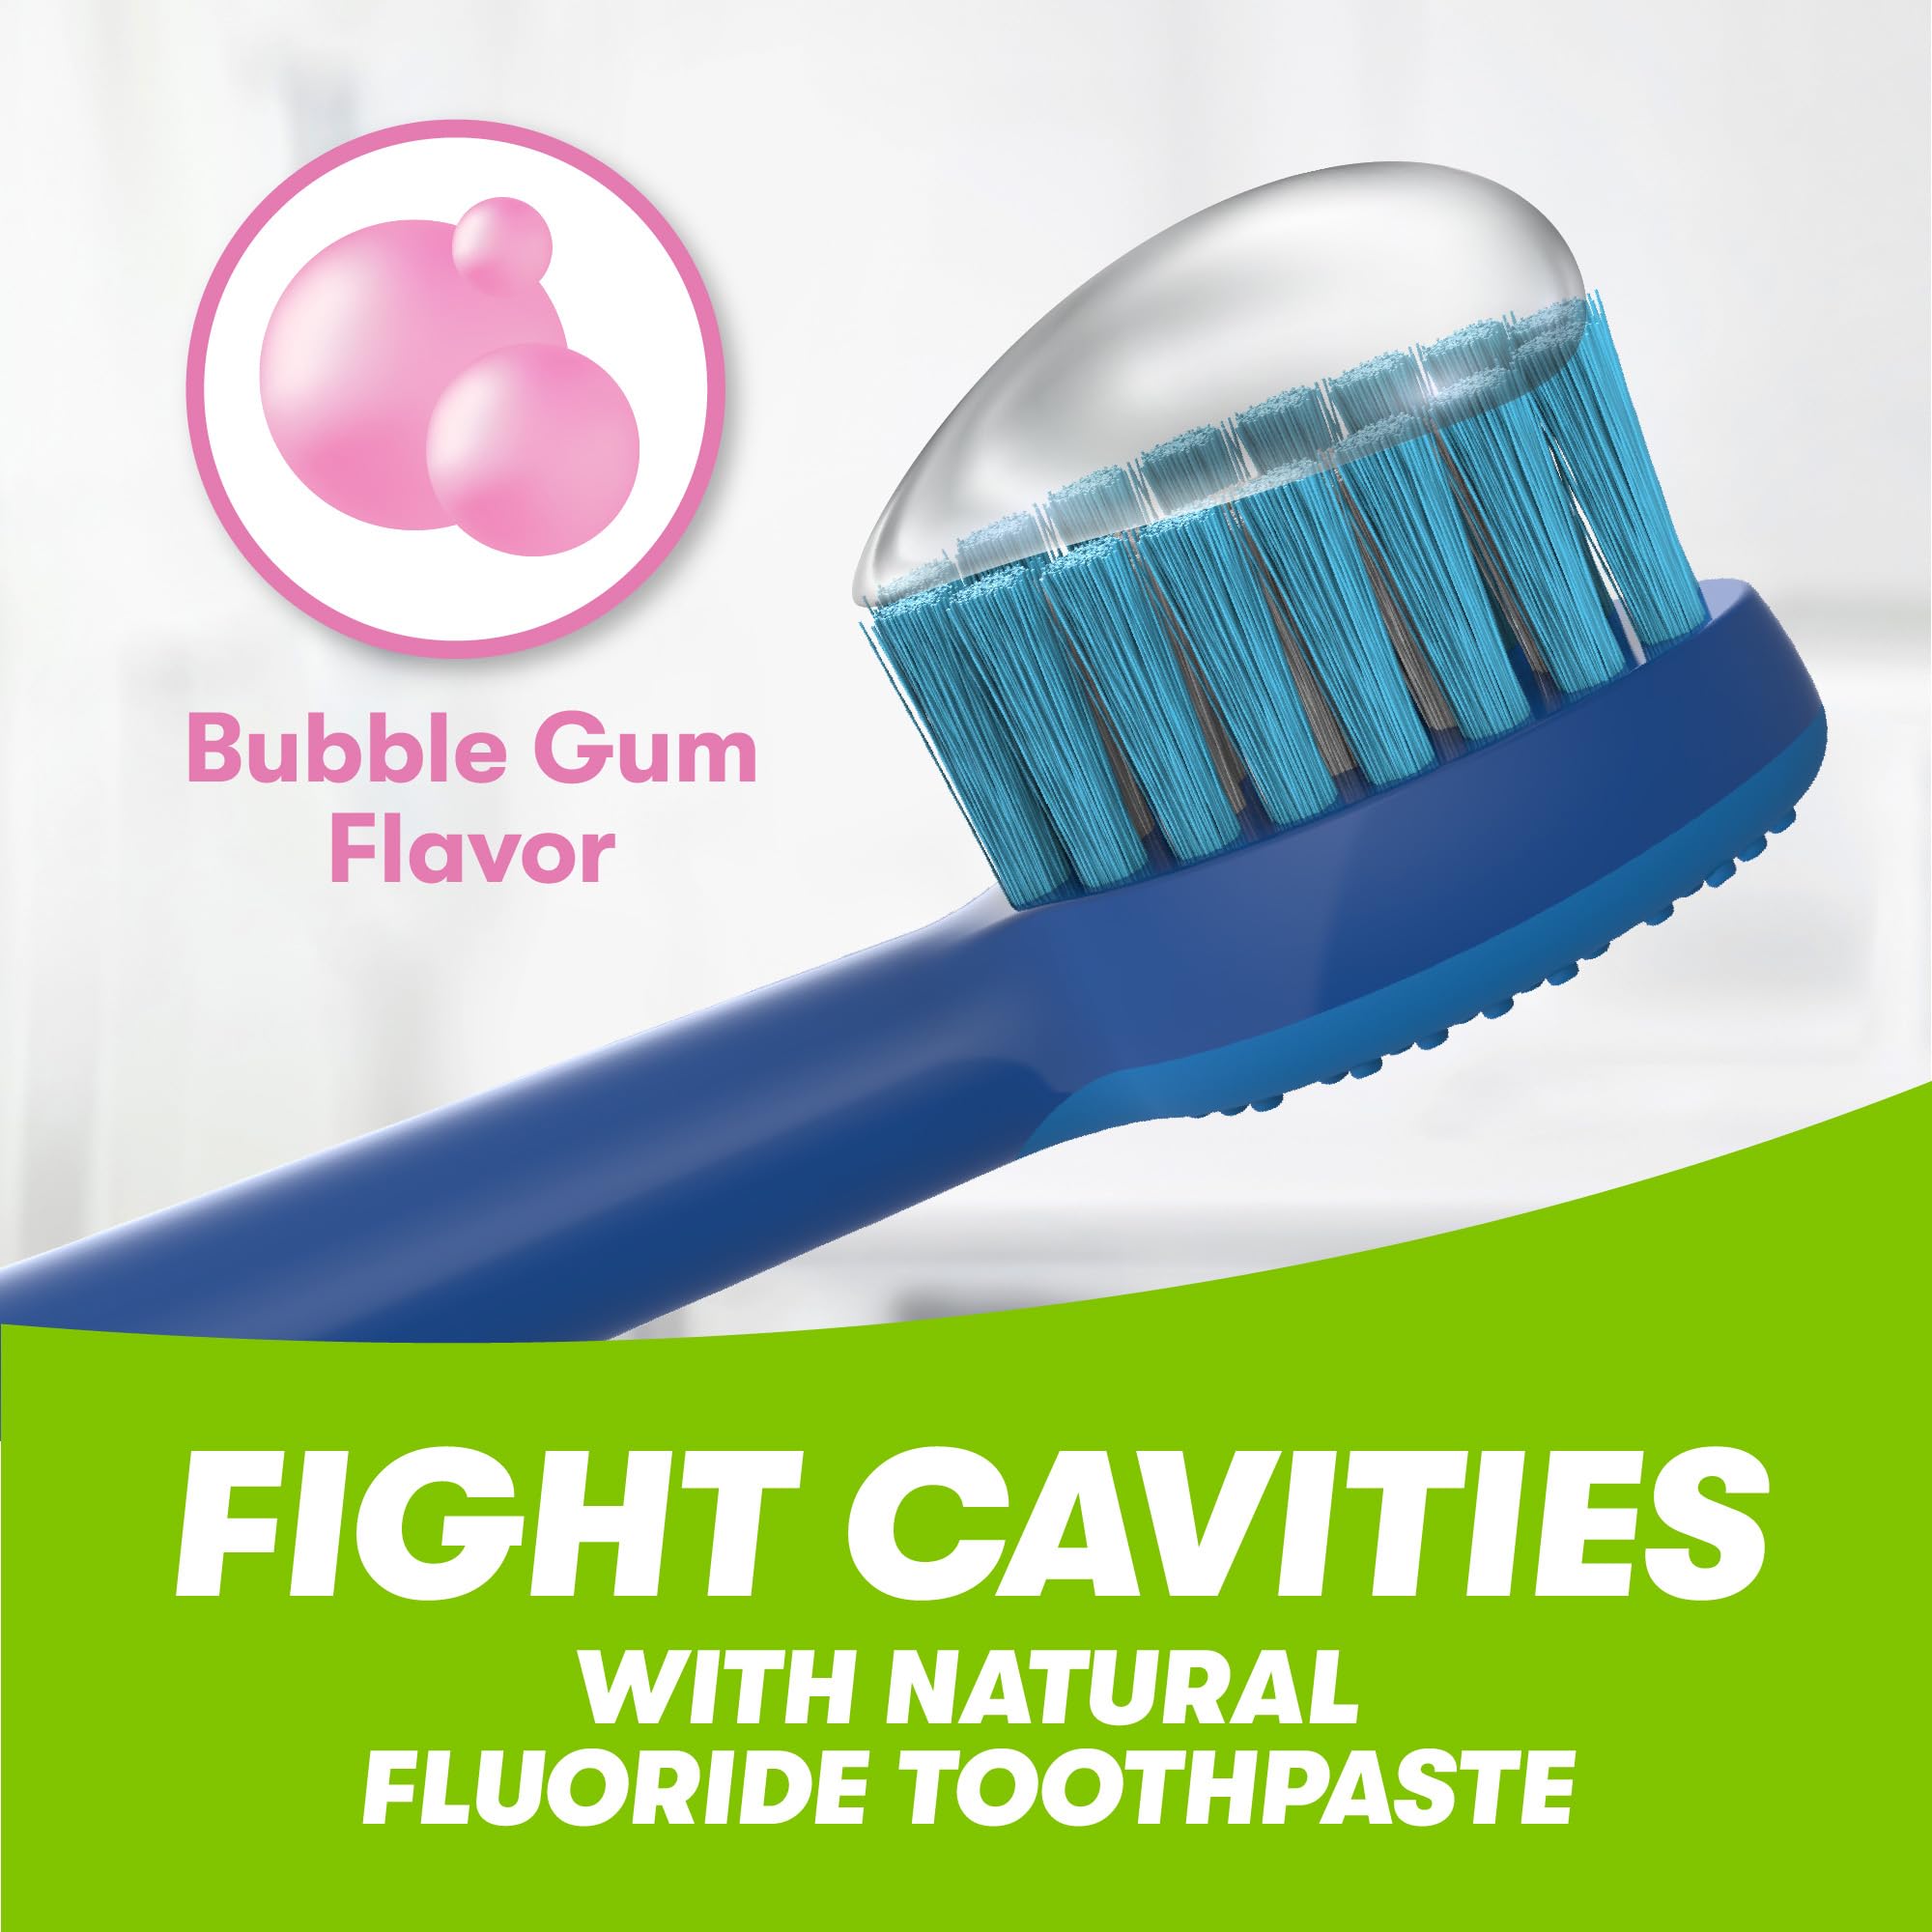 Firefly Kids Anti-Cavity Natural Fluoride Toothpaste, TMNT, Bubble Gum Flavor, ADA Accepted, 4.2 OZ